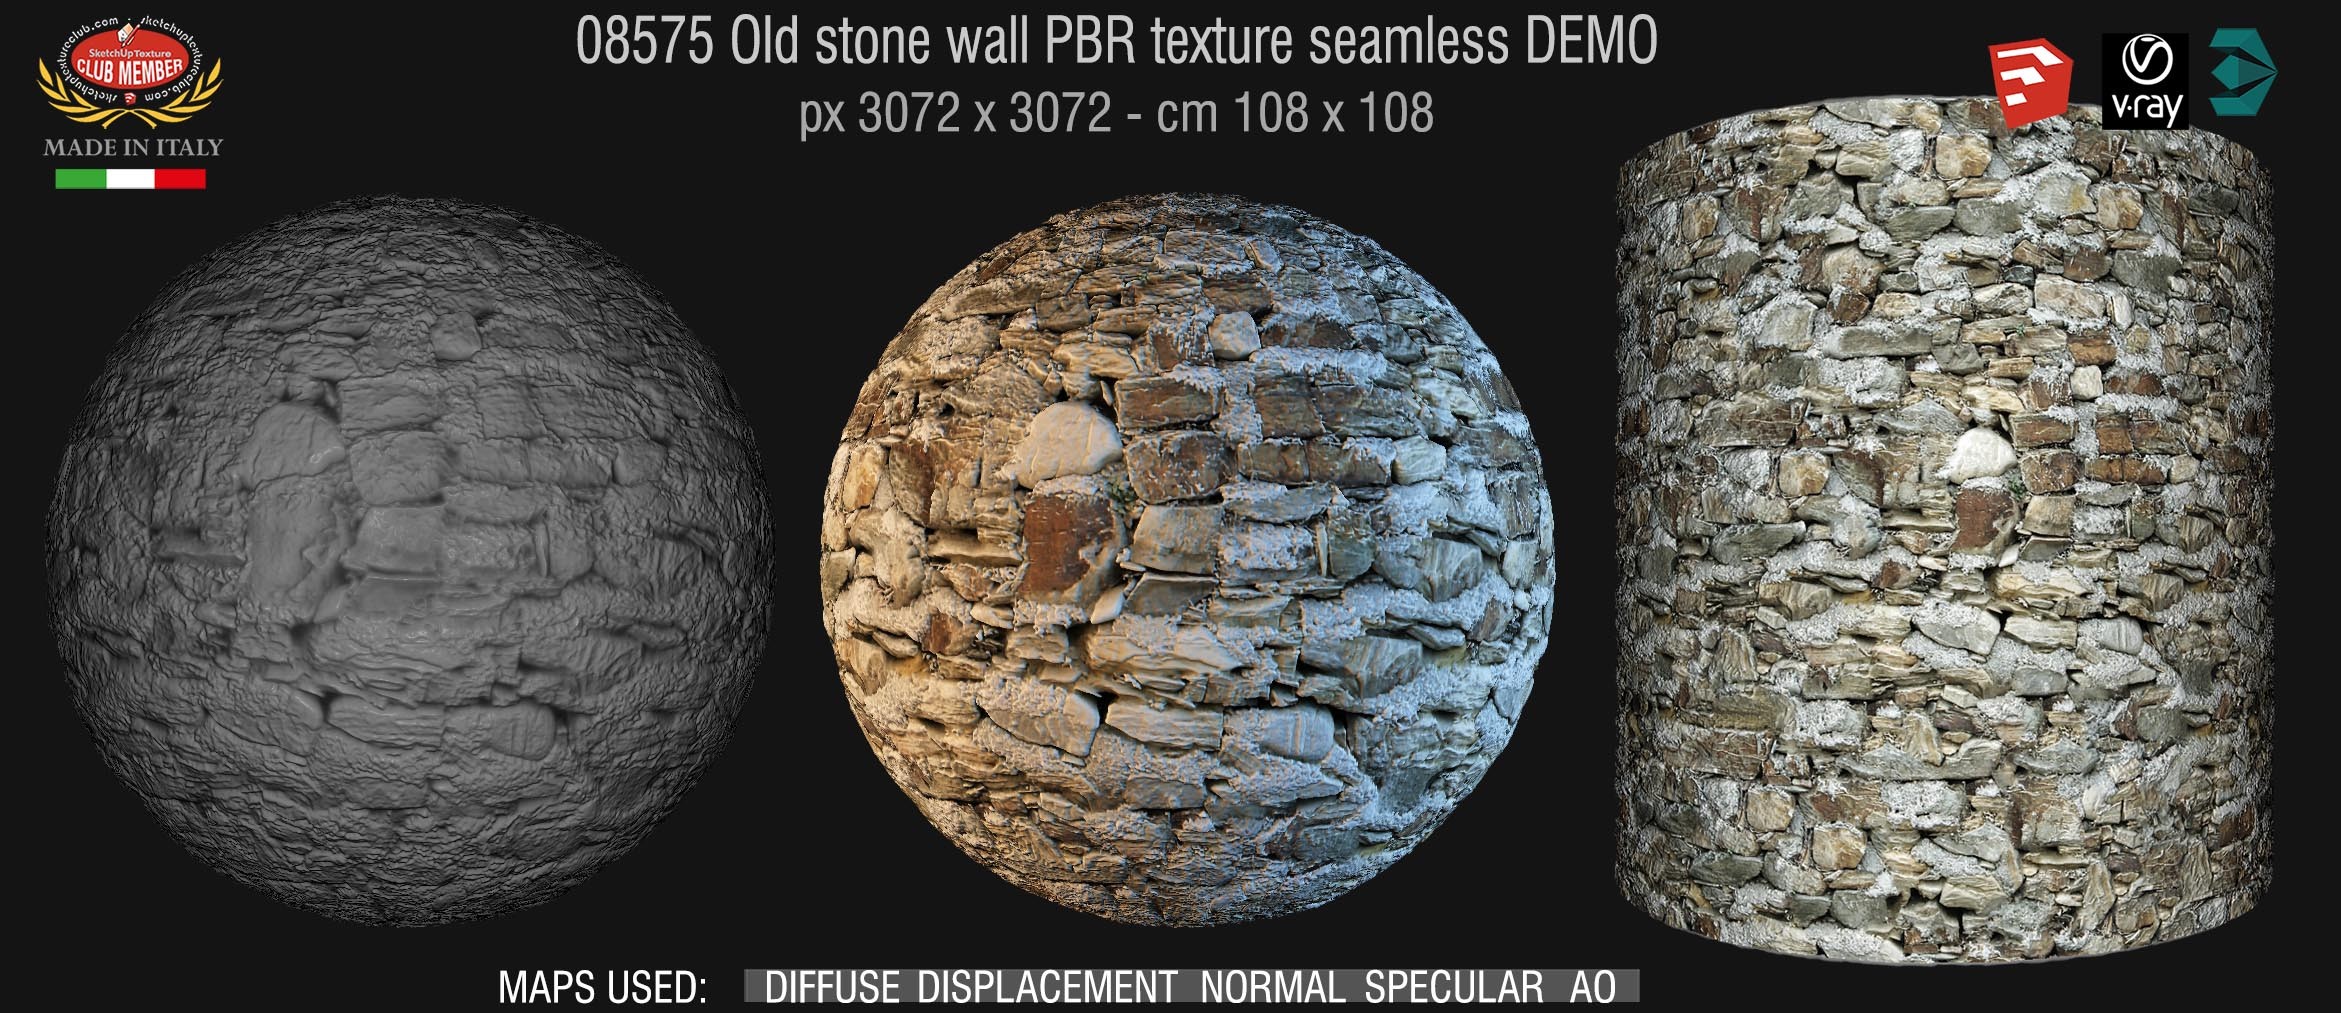 08575 Old stone wall PBR texture seamless DEMO